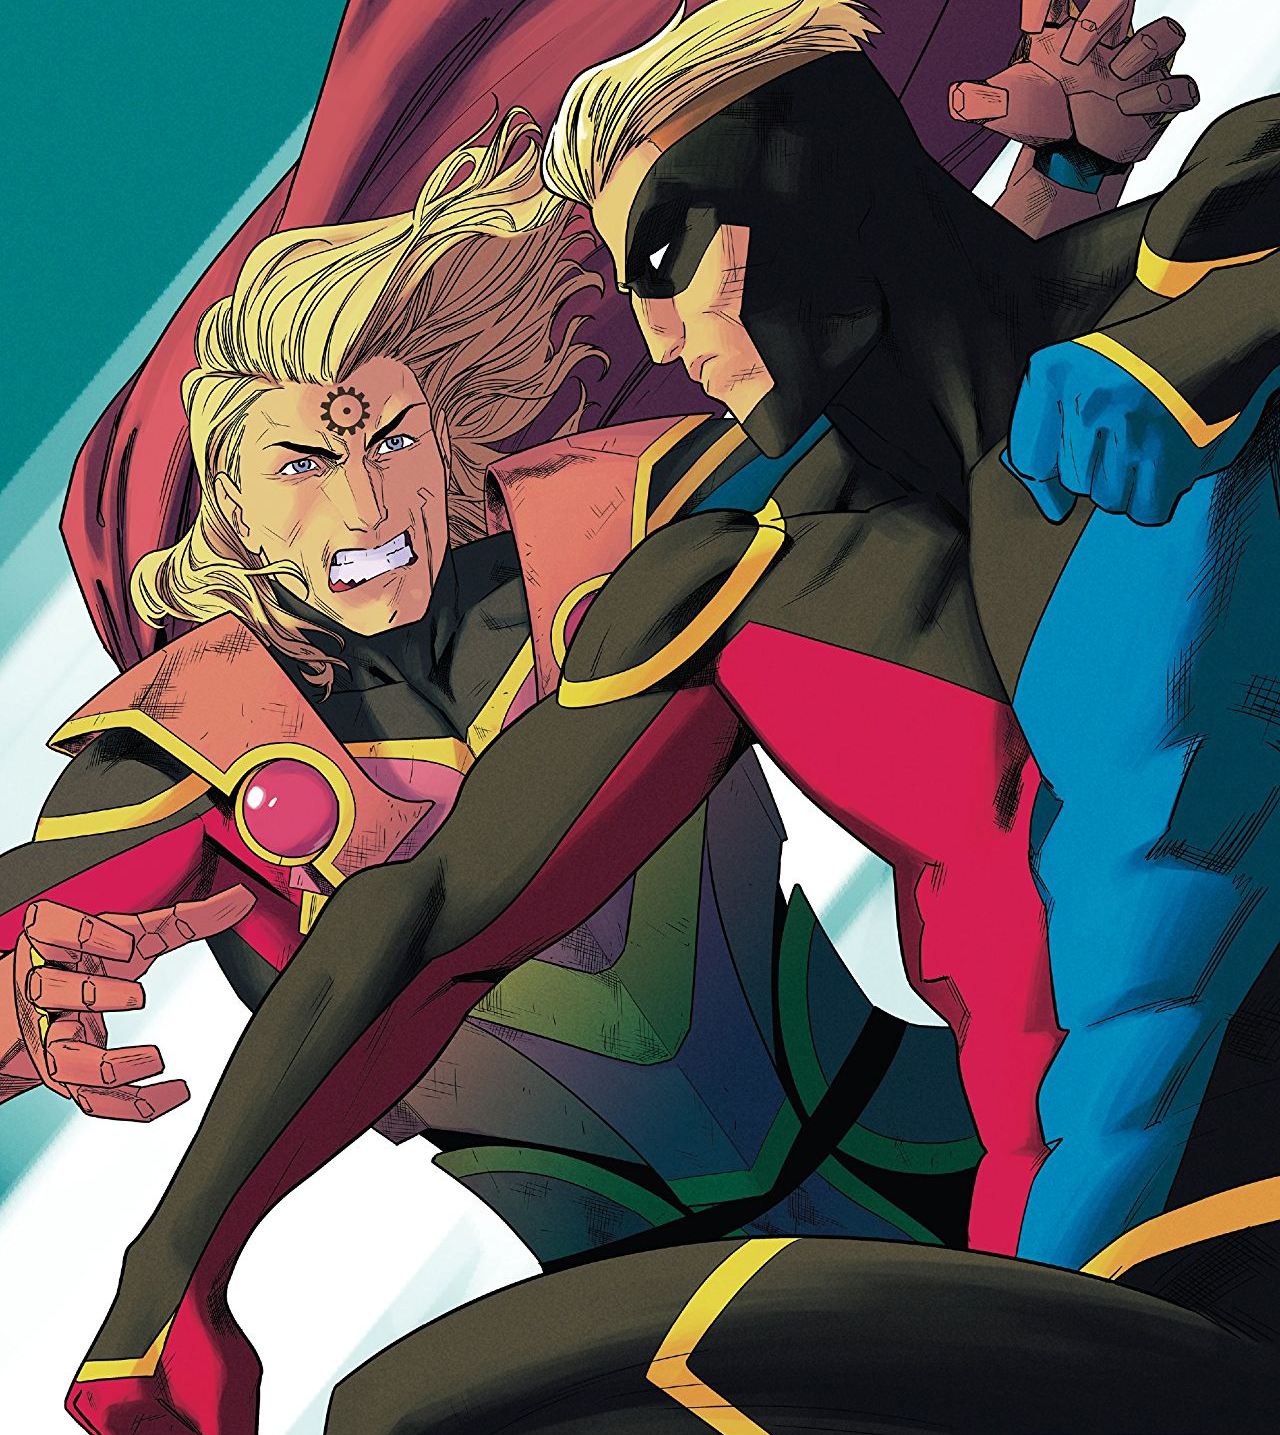 Peter Cannon: Thunderbolt #4 review: The Crowd